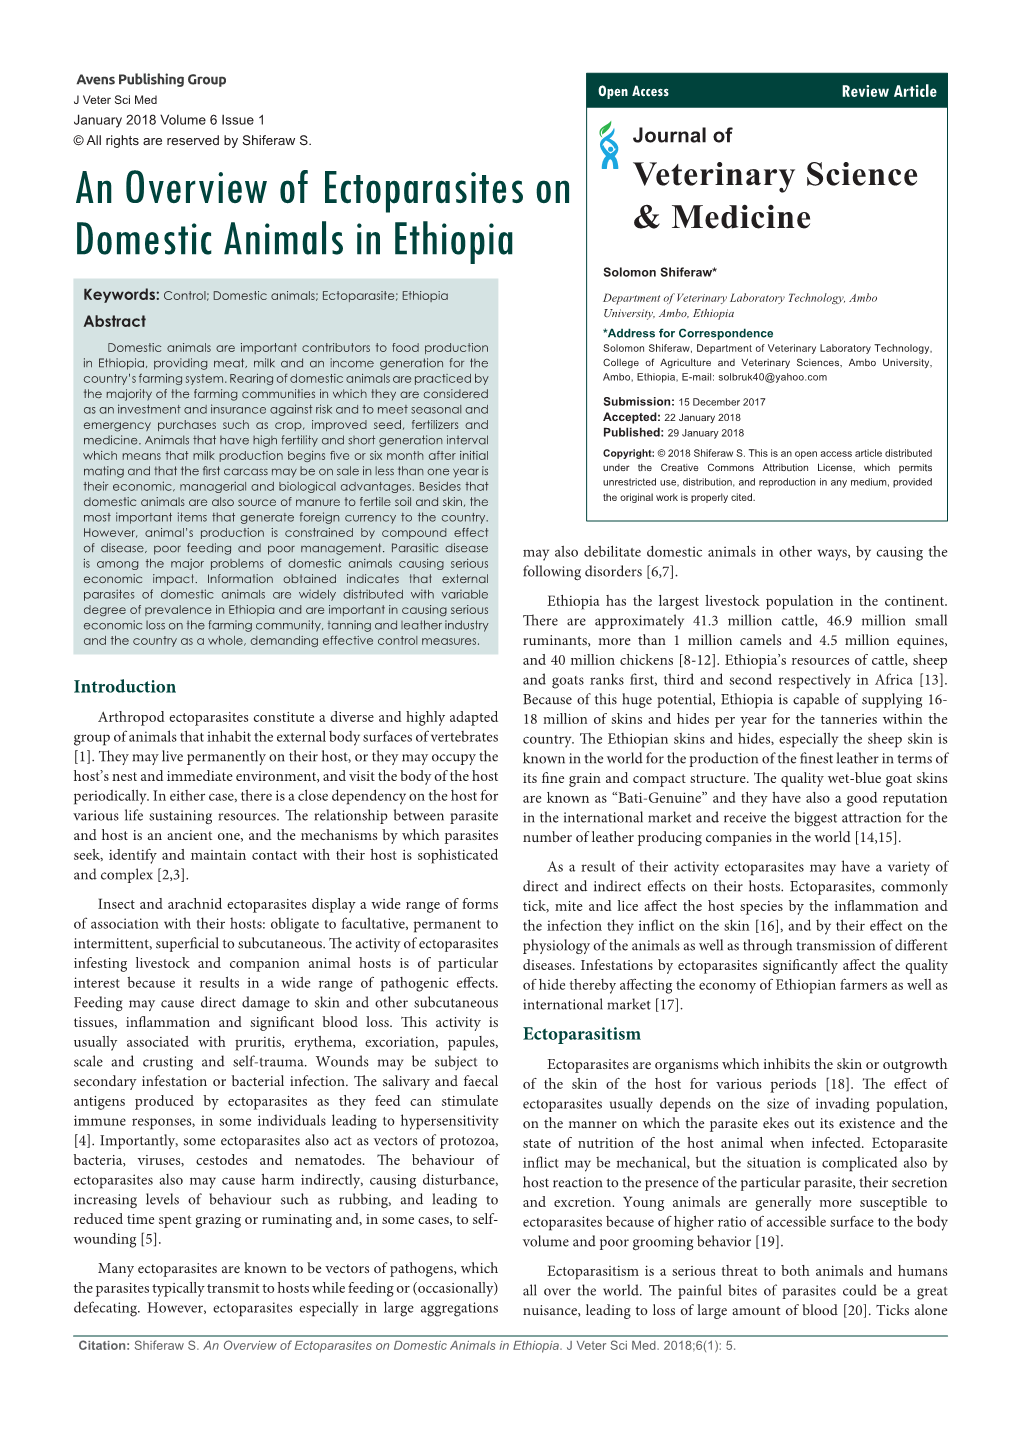 An Overview of Ectoparasites on Domestic Animals in Ethiopia